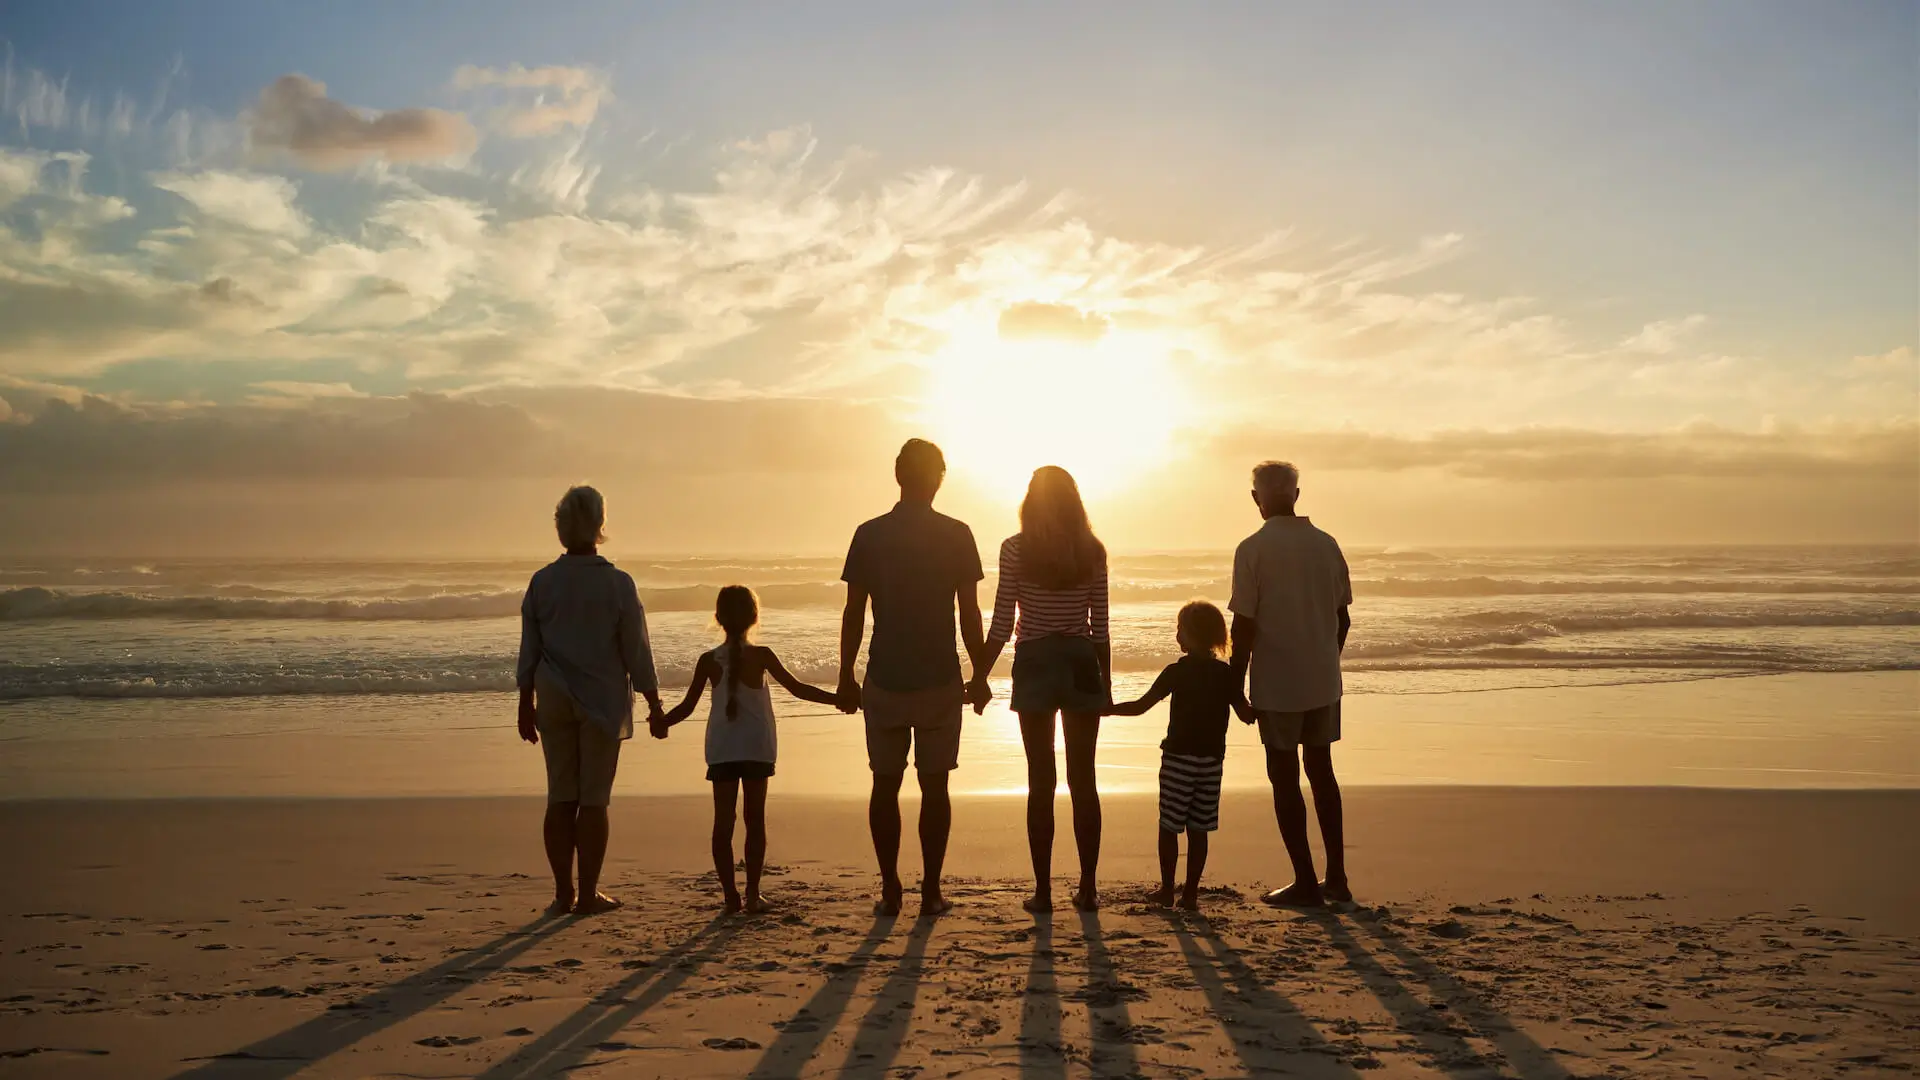 Rear View Of Multi Generation Family Silhouetted On Beach